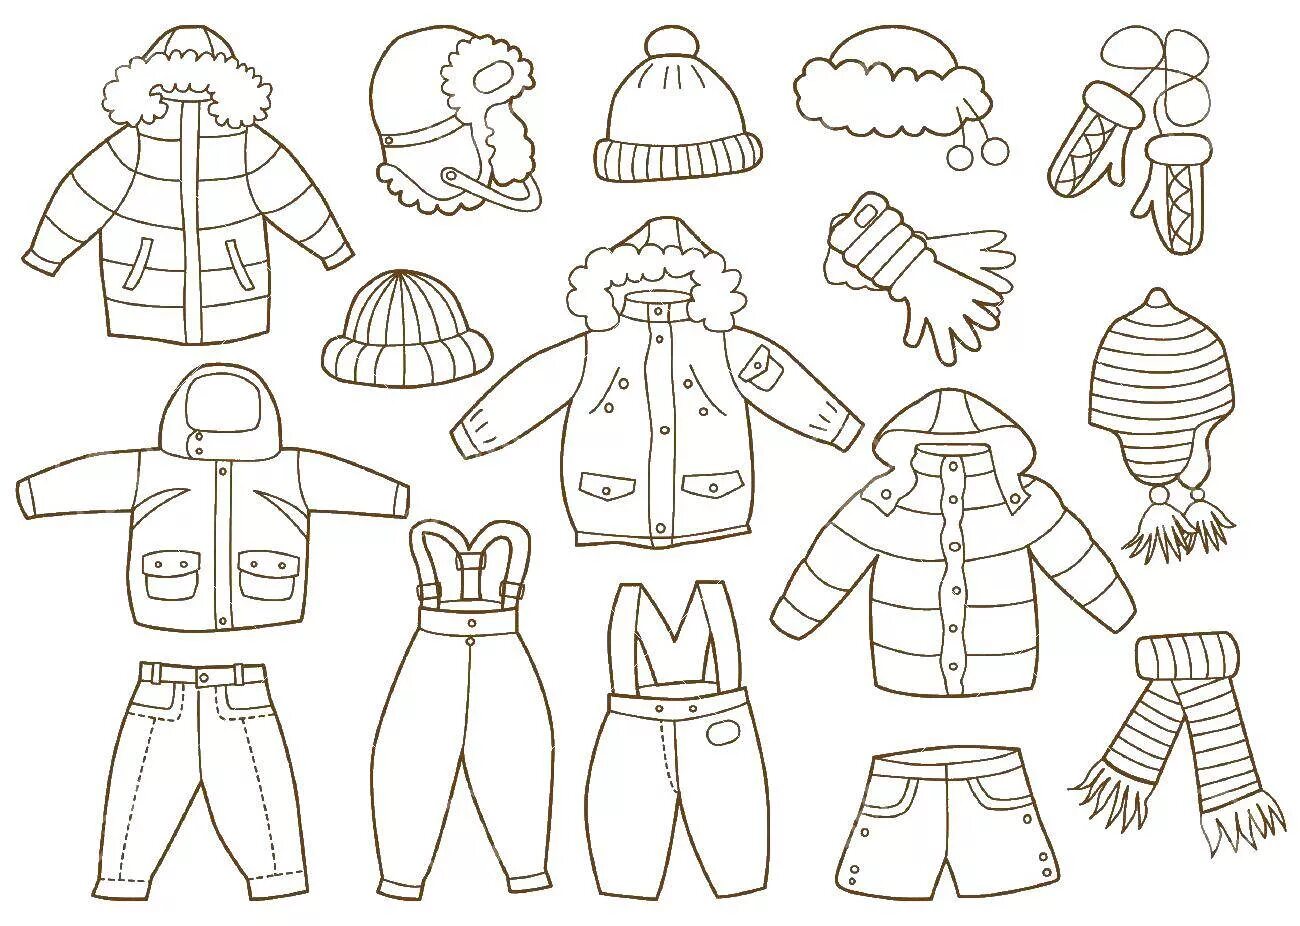 Winter clothes for children 5 6 years old #2